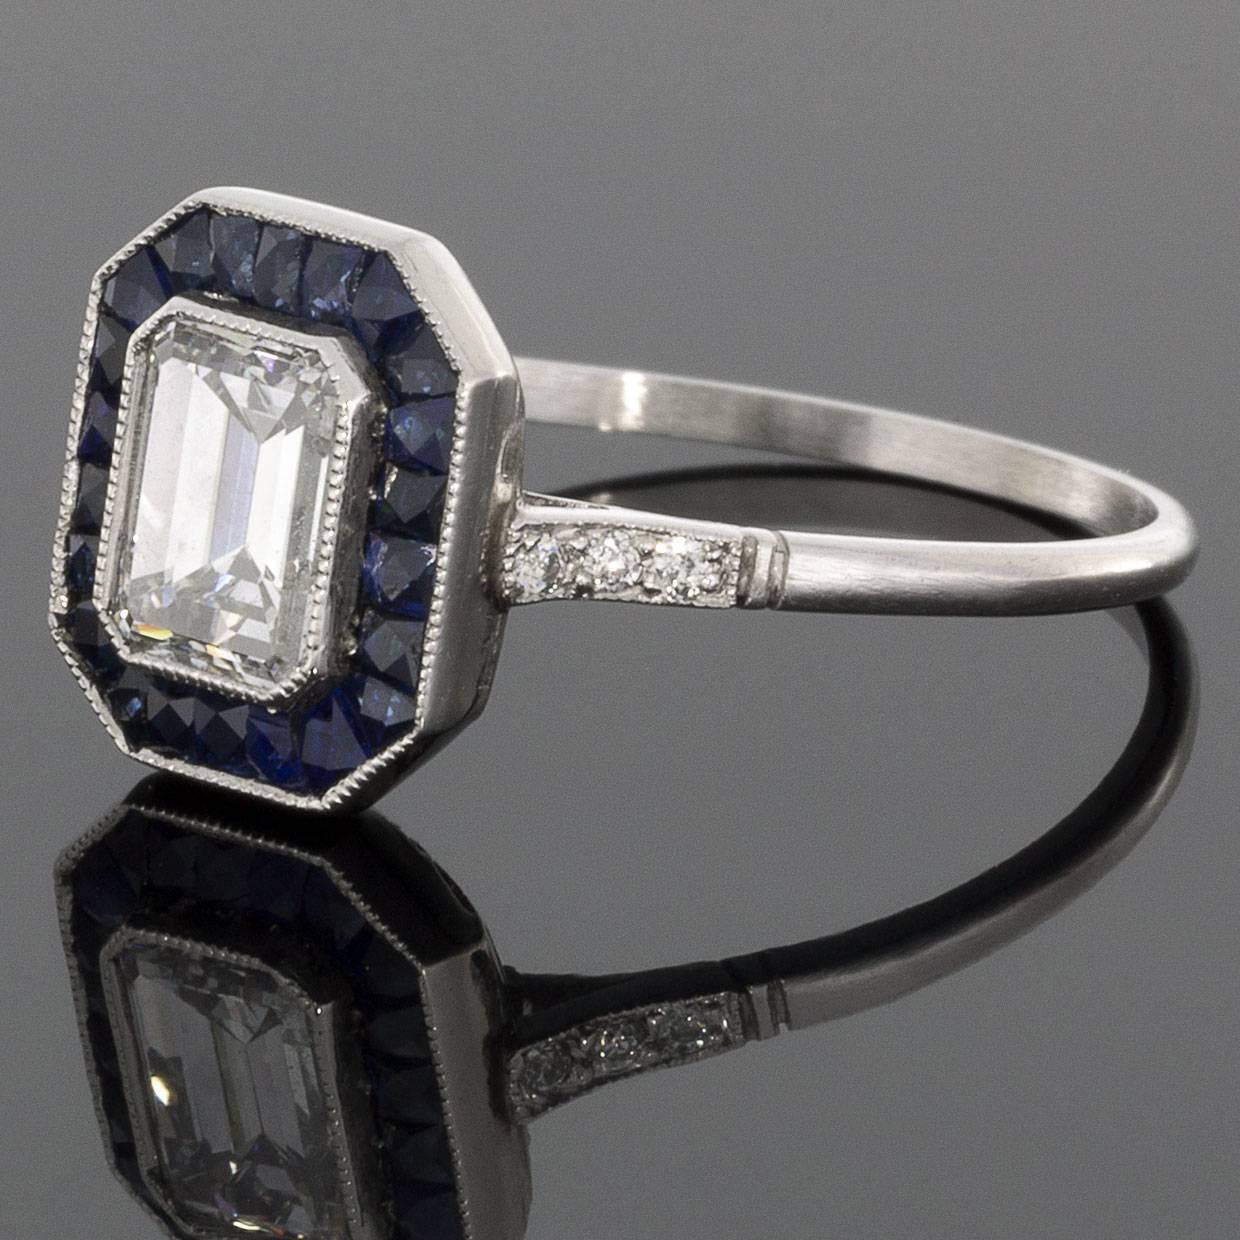 Emerald cut diamonds have a unique sparkle with a beautiful mirrored effect from their step cut. This cut highlights the diamond's clarity, produces dramatic flashes of light, & has an elegant appeal. The center stone in this stunning engagement